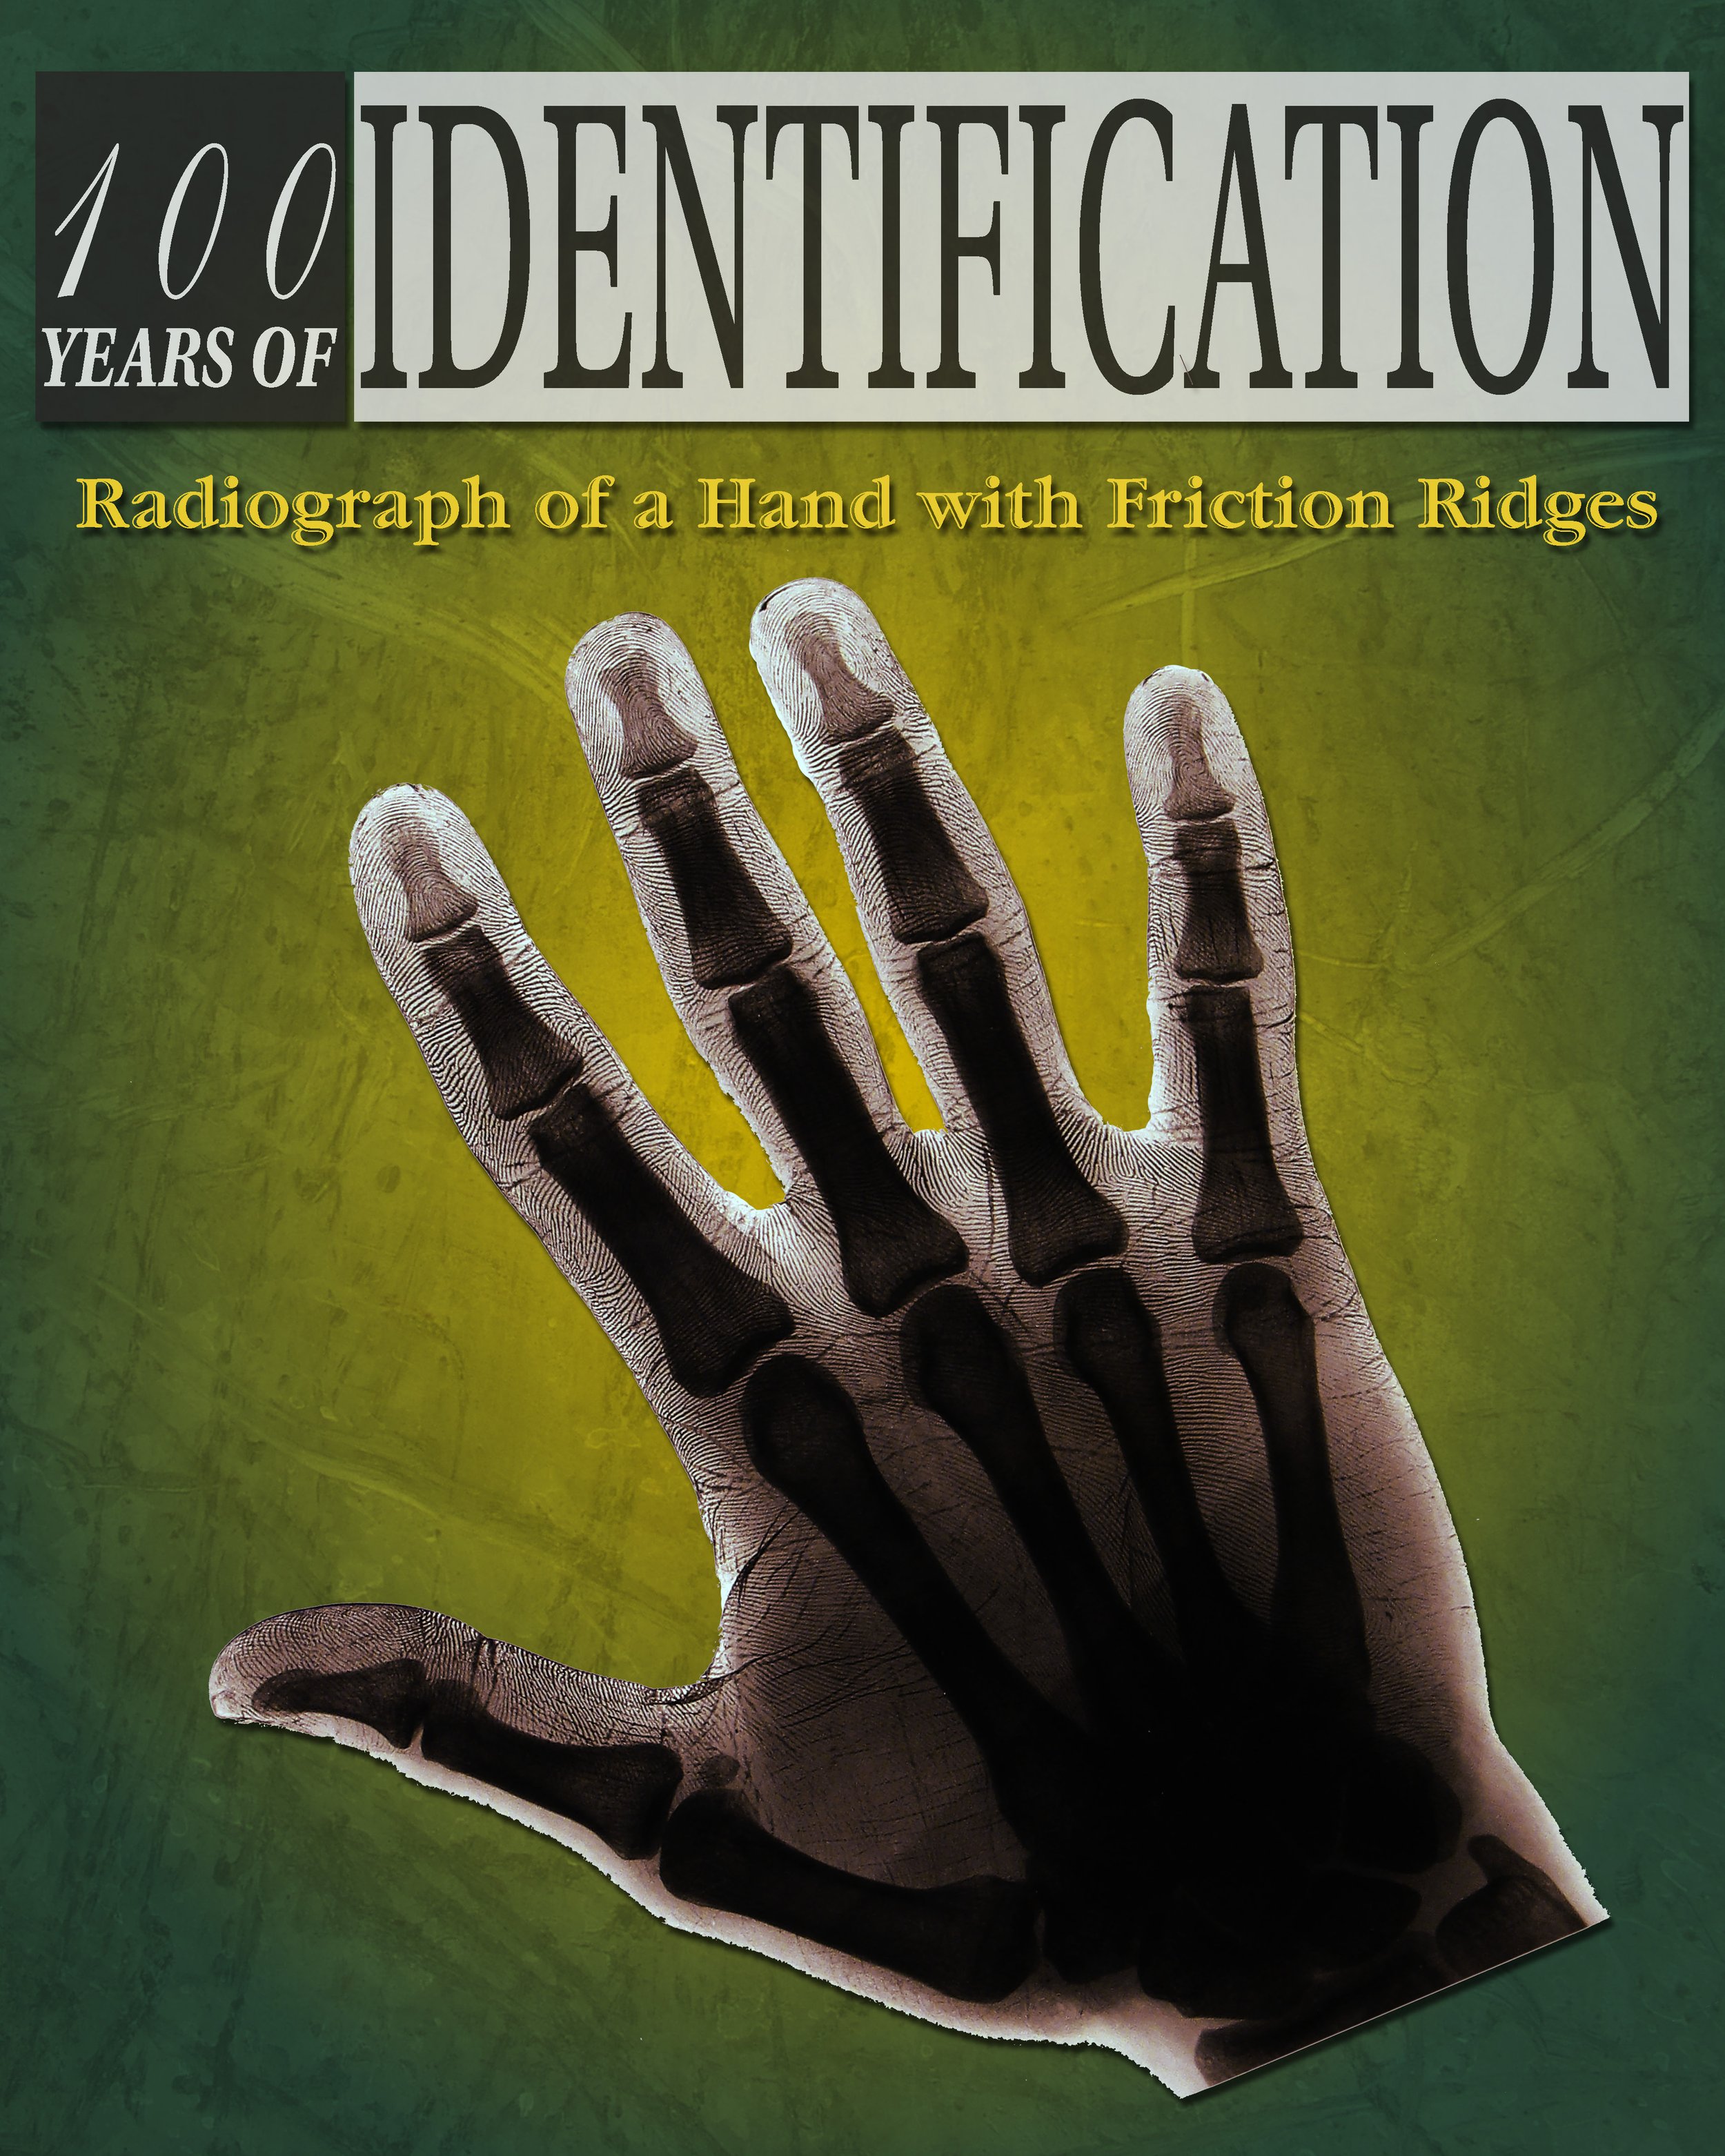  Part of a series in informational graphics for "100 Years of Identification" for the Los Angeles County Sheriff's Department. 